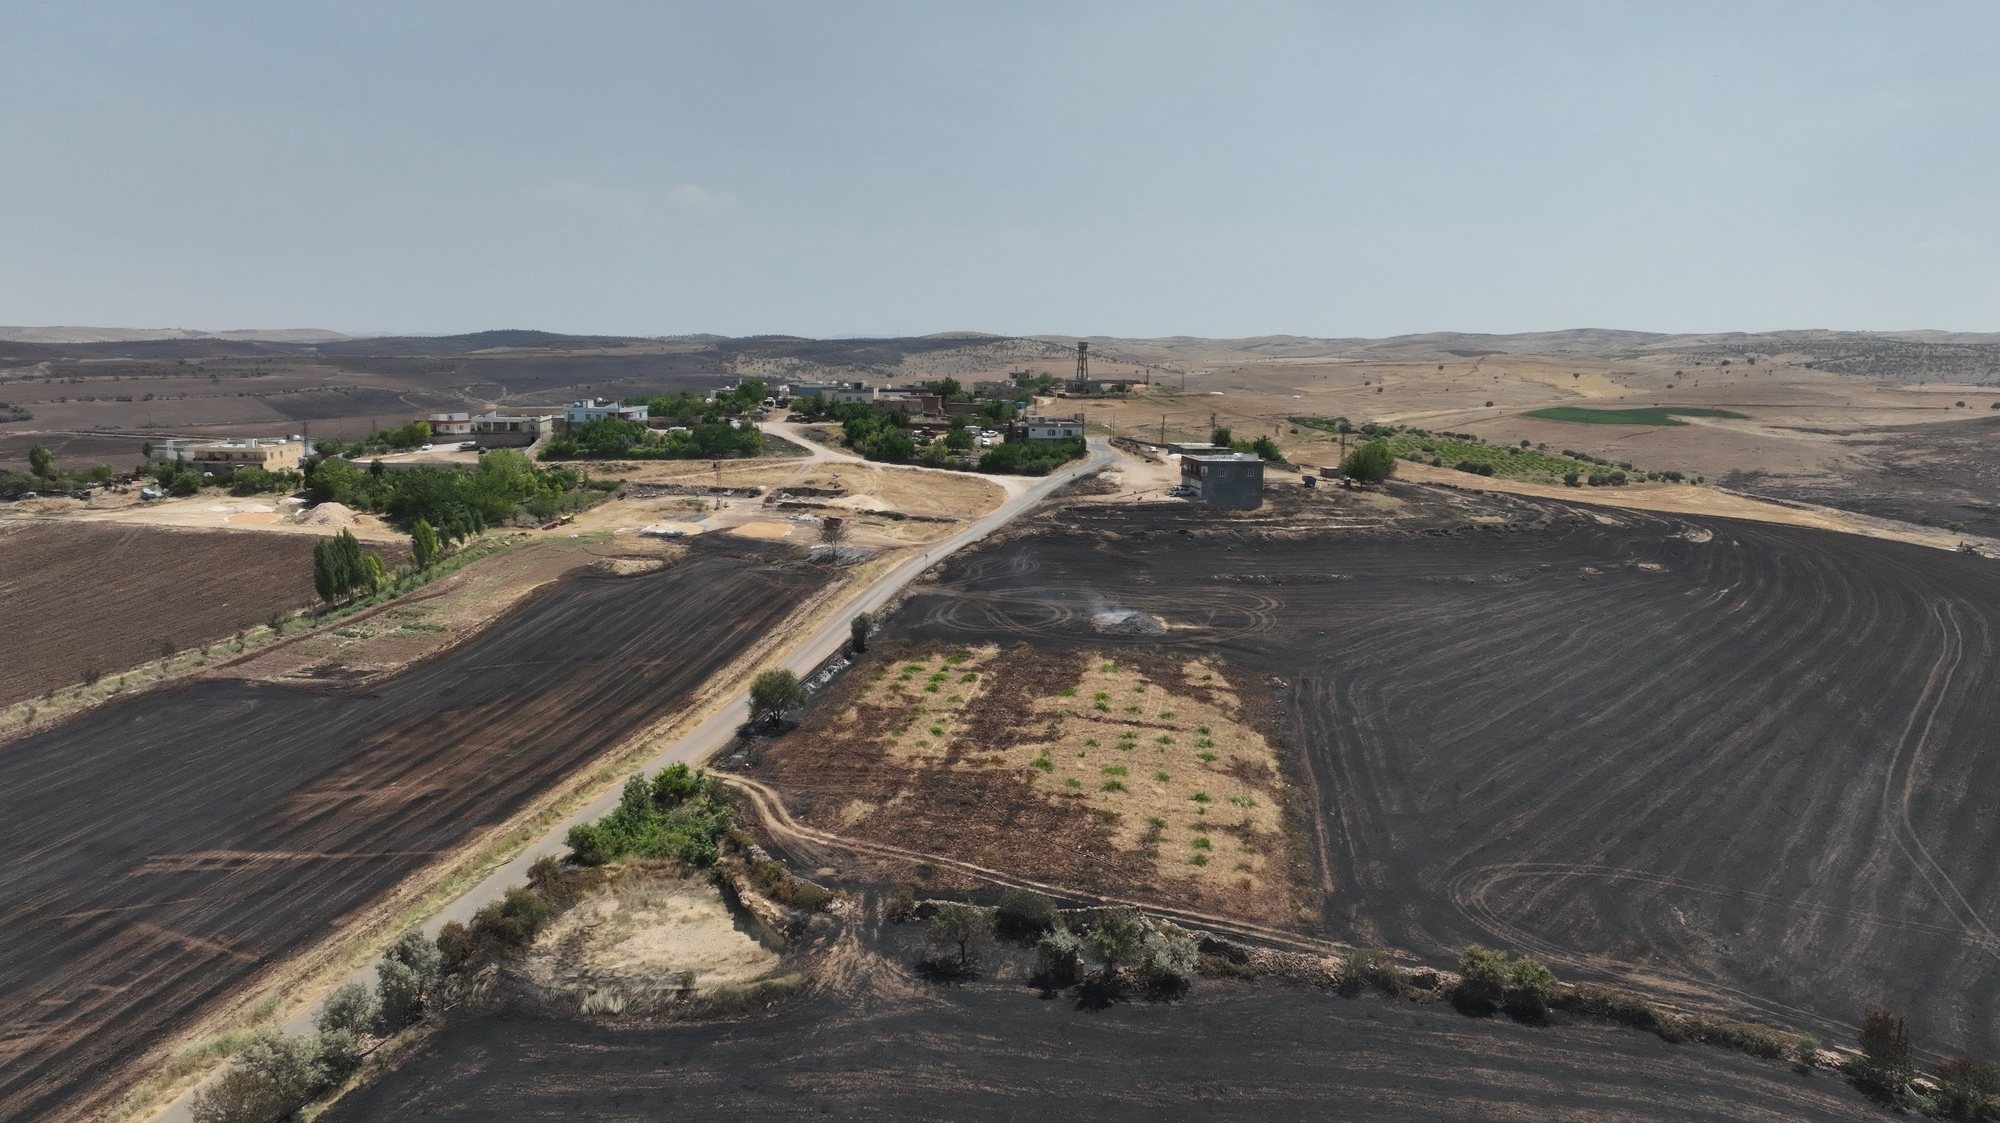 epa11428002 A handout photo made available by the Diyarbakir Municipality shows a view of the burned lands after a stubble fire at Diyarbakir, Turkey, 21 June 2024. Turkish Health Minister Fahrettin Koca announced that 11 people died and 78 people were affected by the stubble fires in Diyarbakır and Mardin provinces in southeastern Turkey.  EPA/DIYARBAKIR MUNICIPALITY HANDOUT  HANDOUT EDITORIAL USE ONLY/NO SALES HANDOUT EDITORIAL USE ONLY/NO SALES